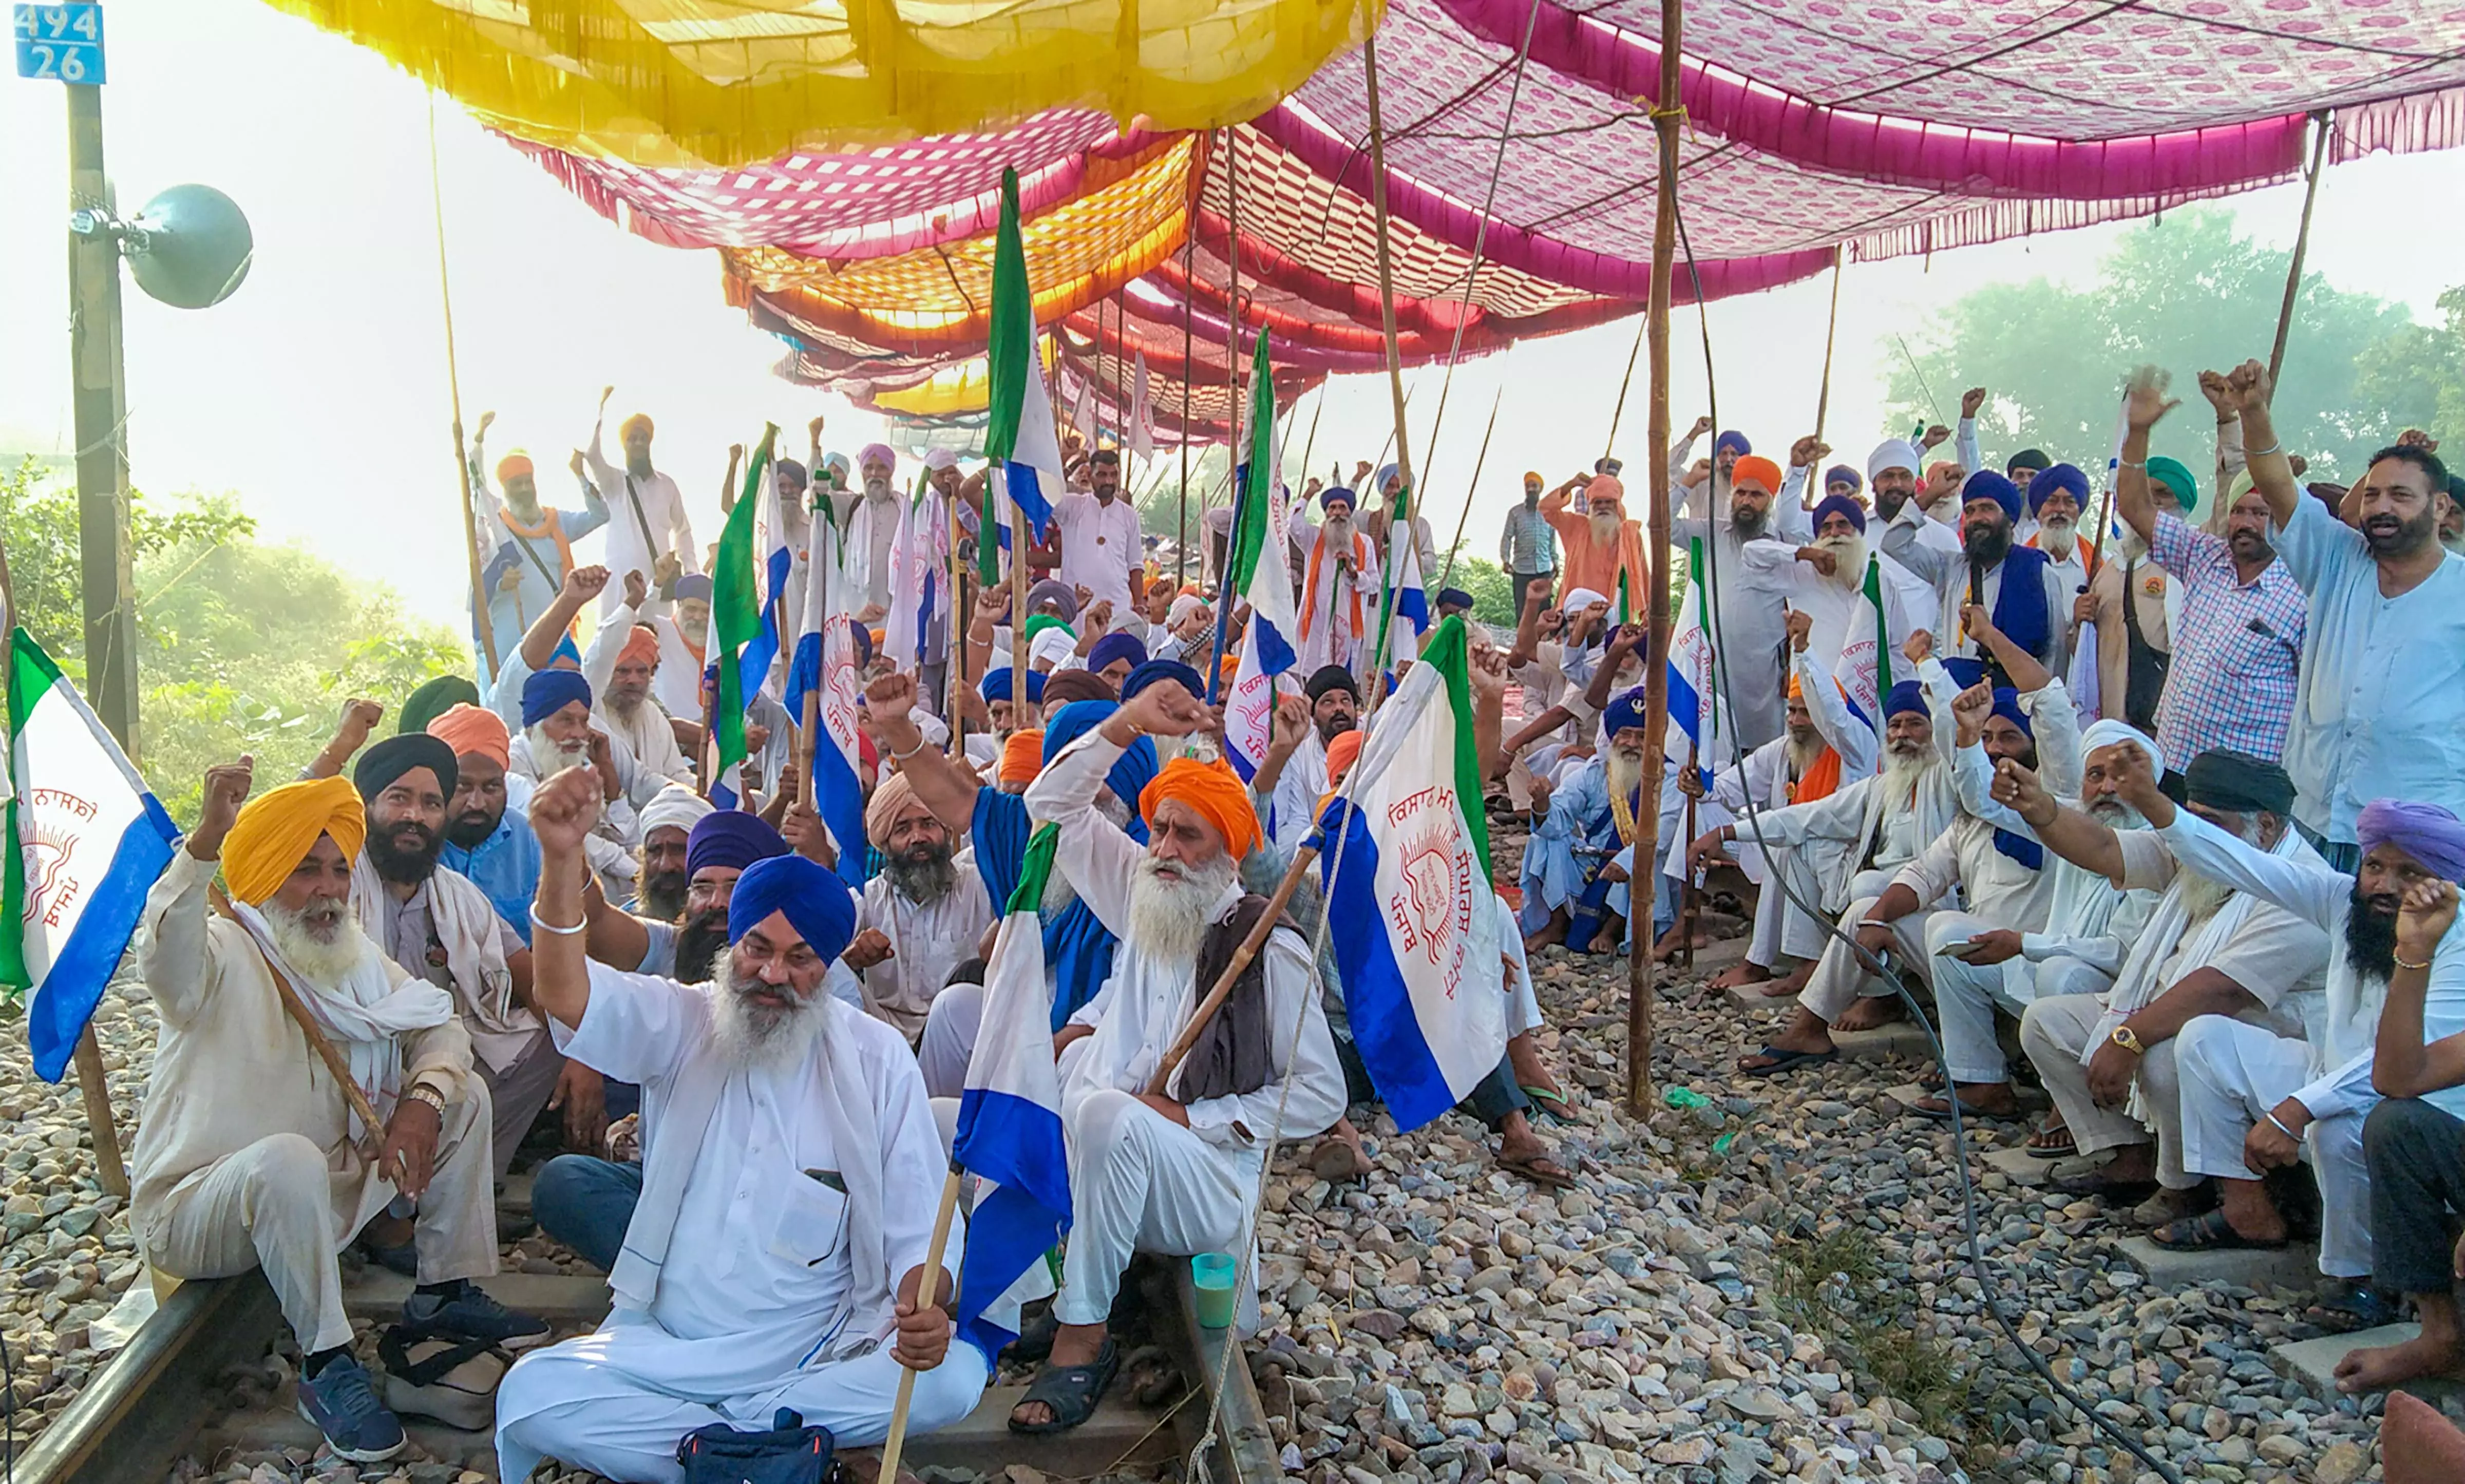 Train services hit as farmers protest enters second day in Punjab